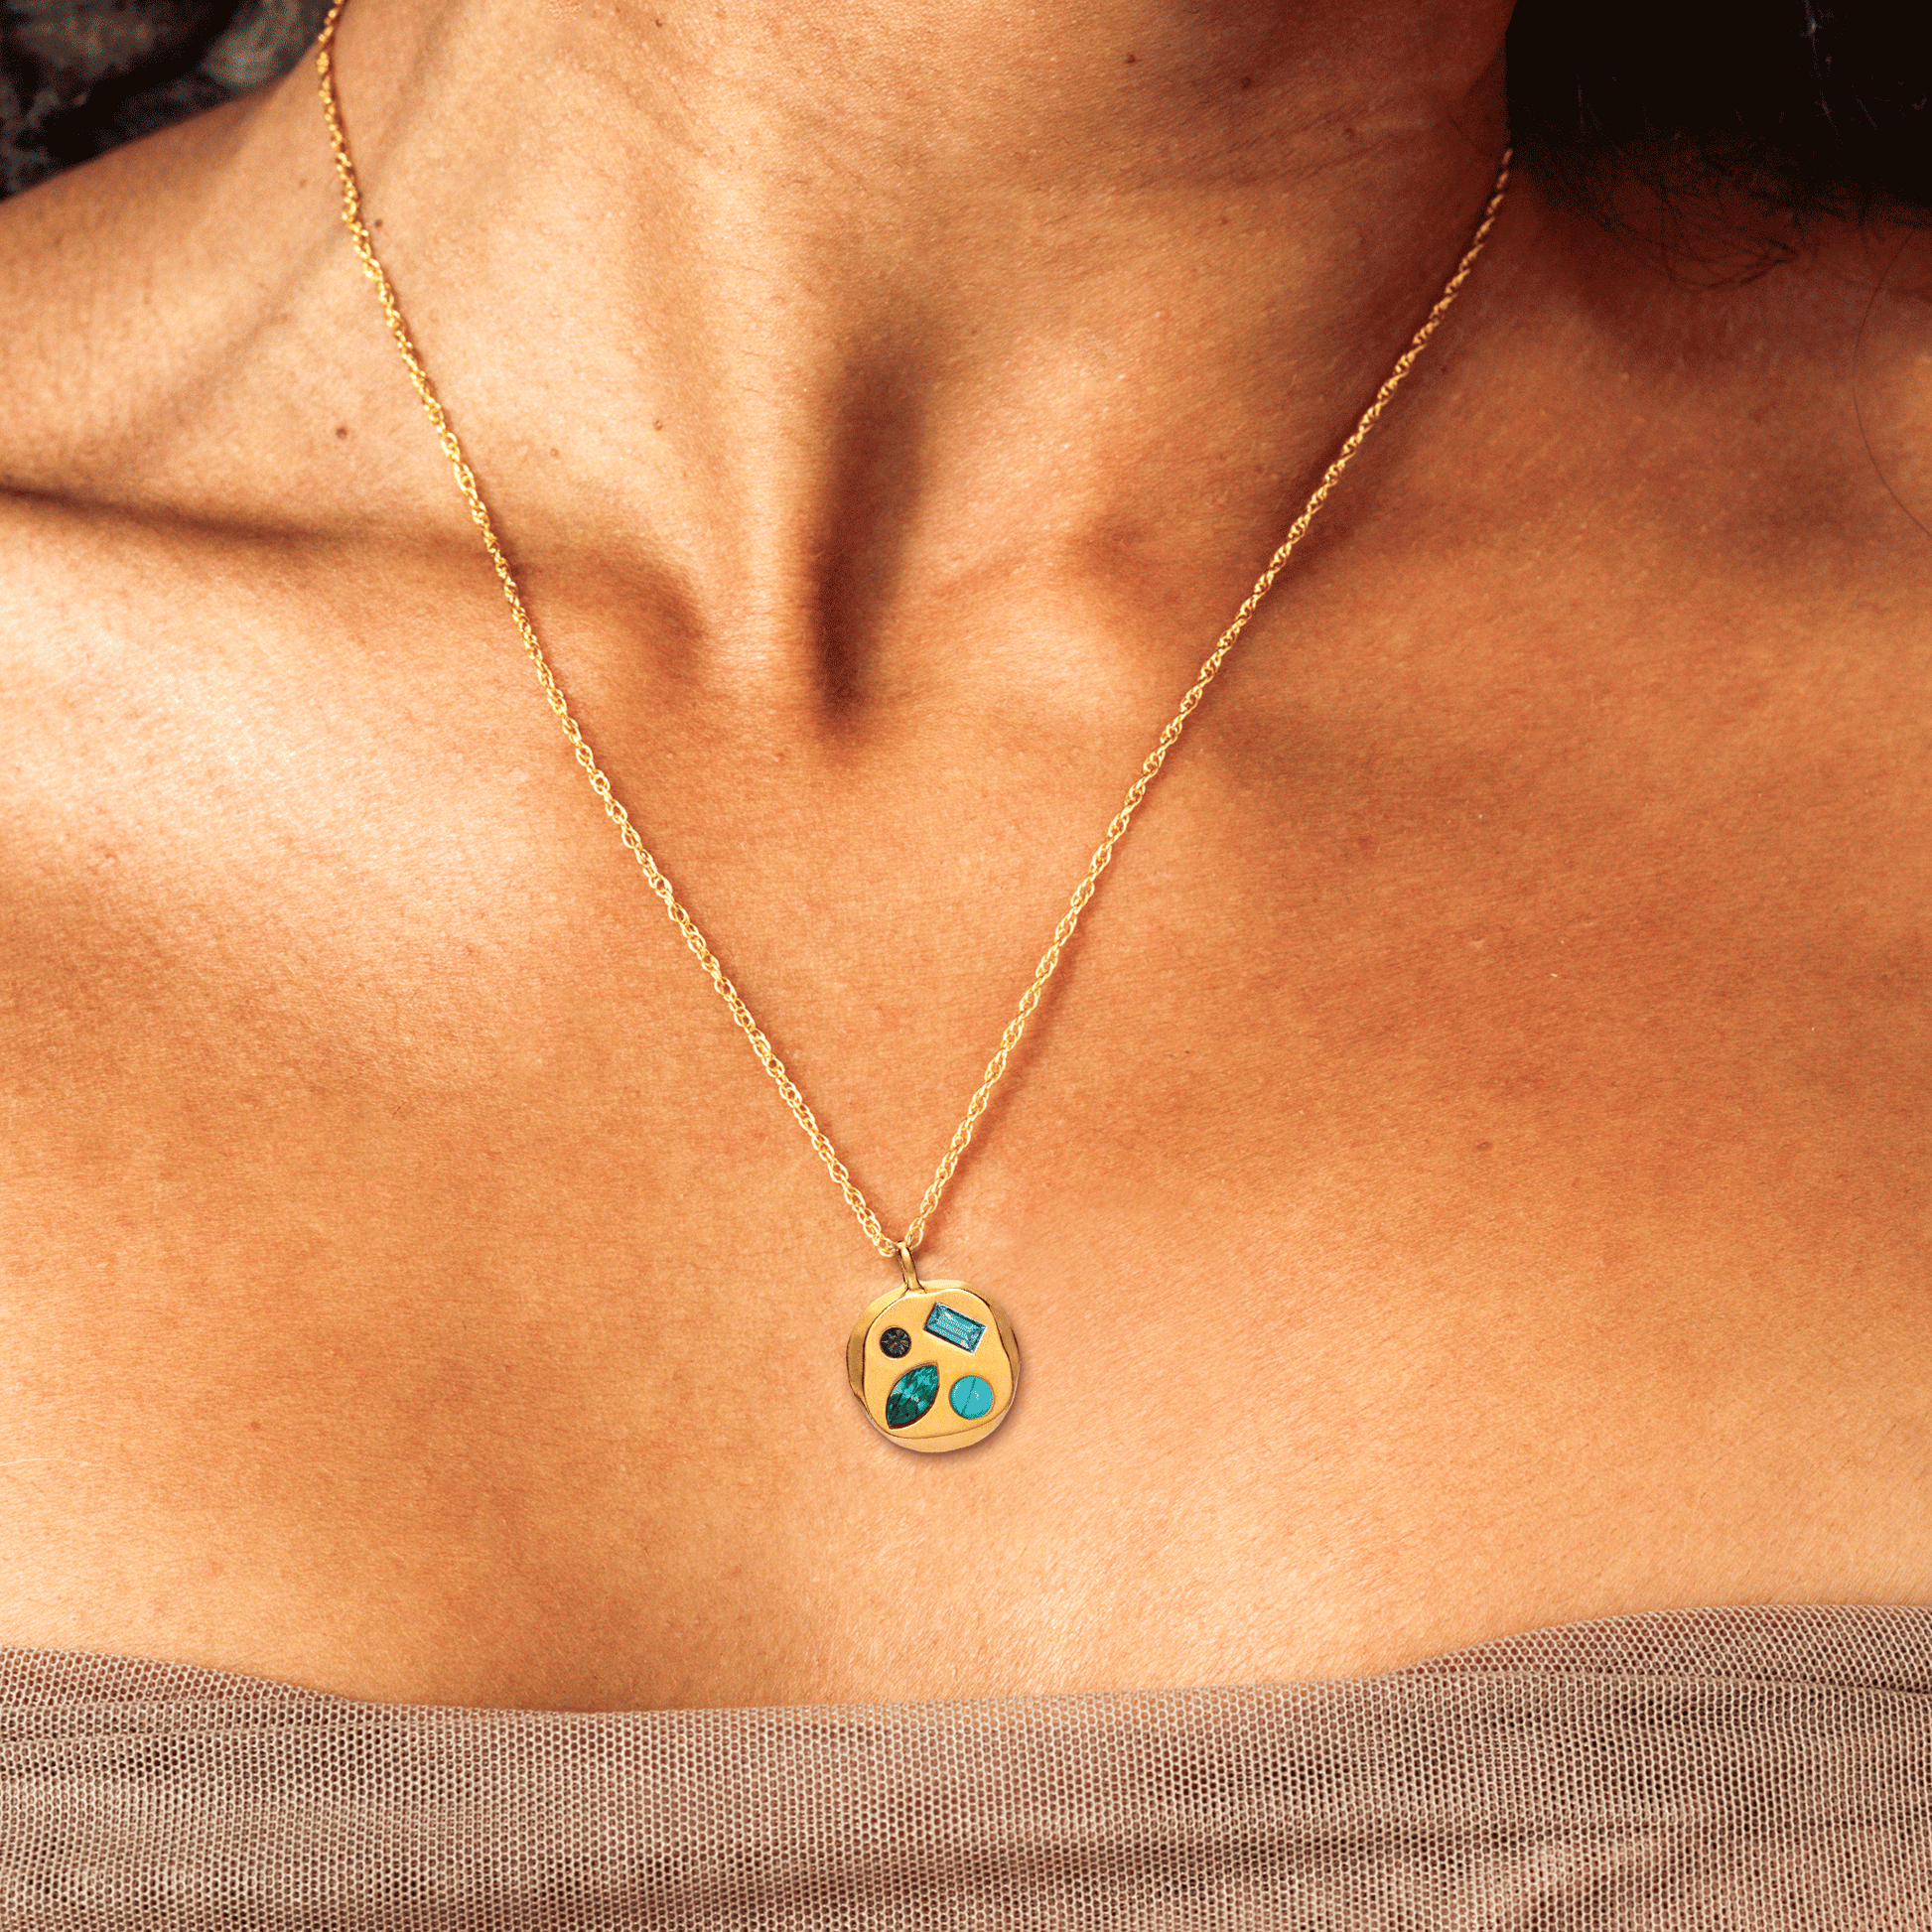 Person wearing The May Thirtieth Pendant